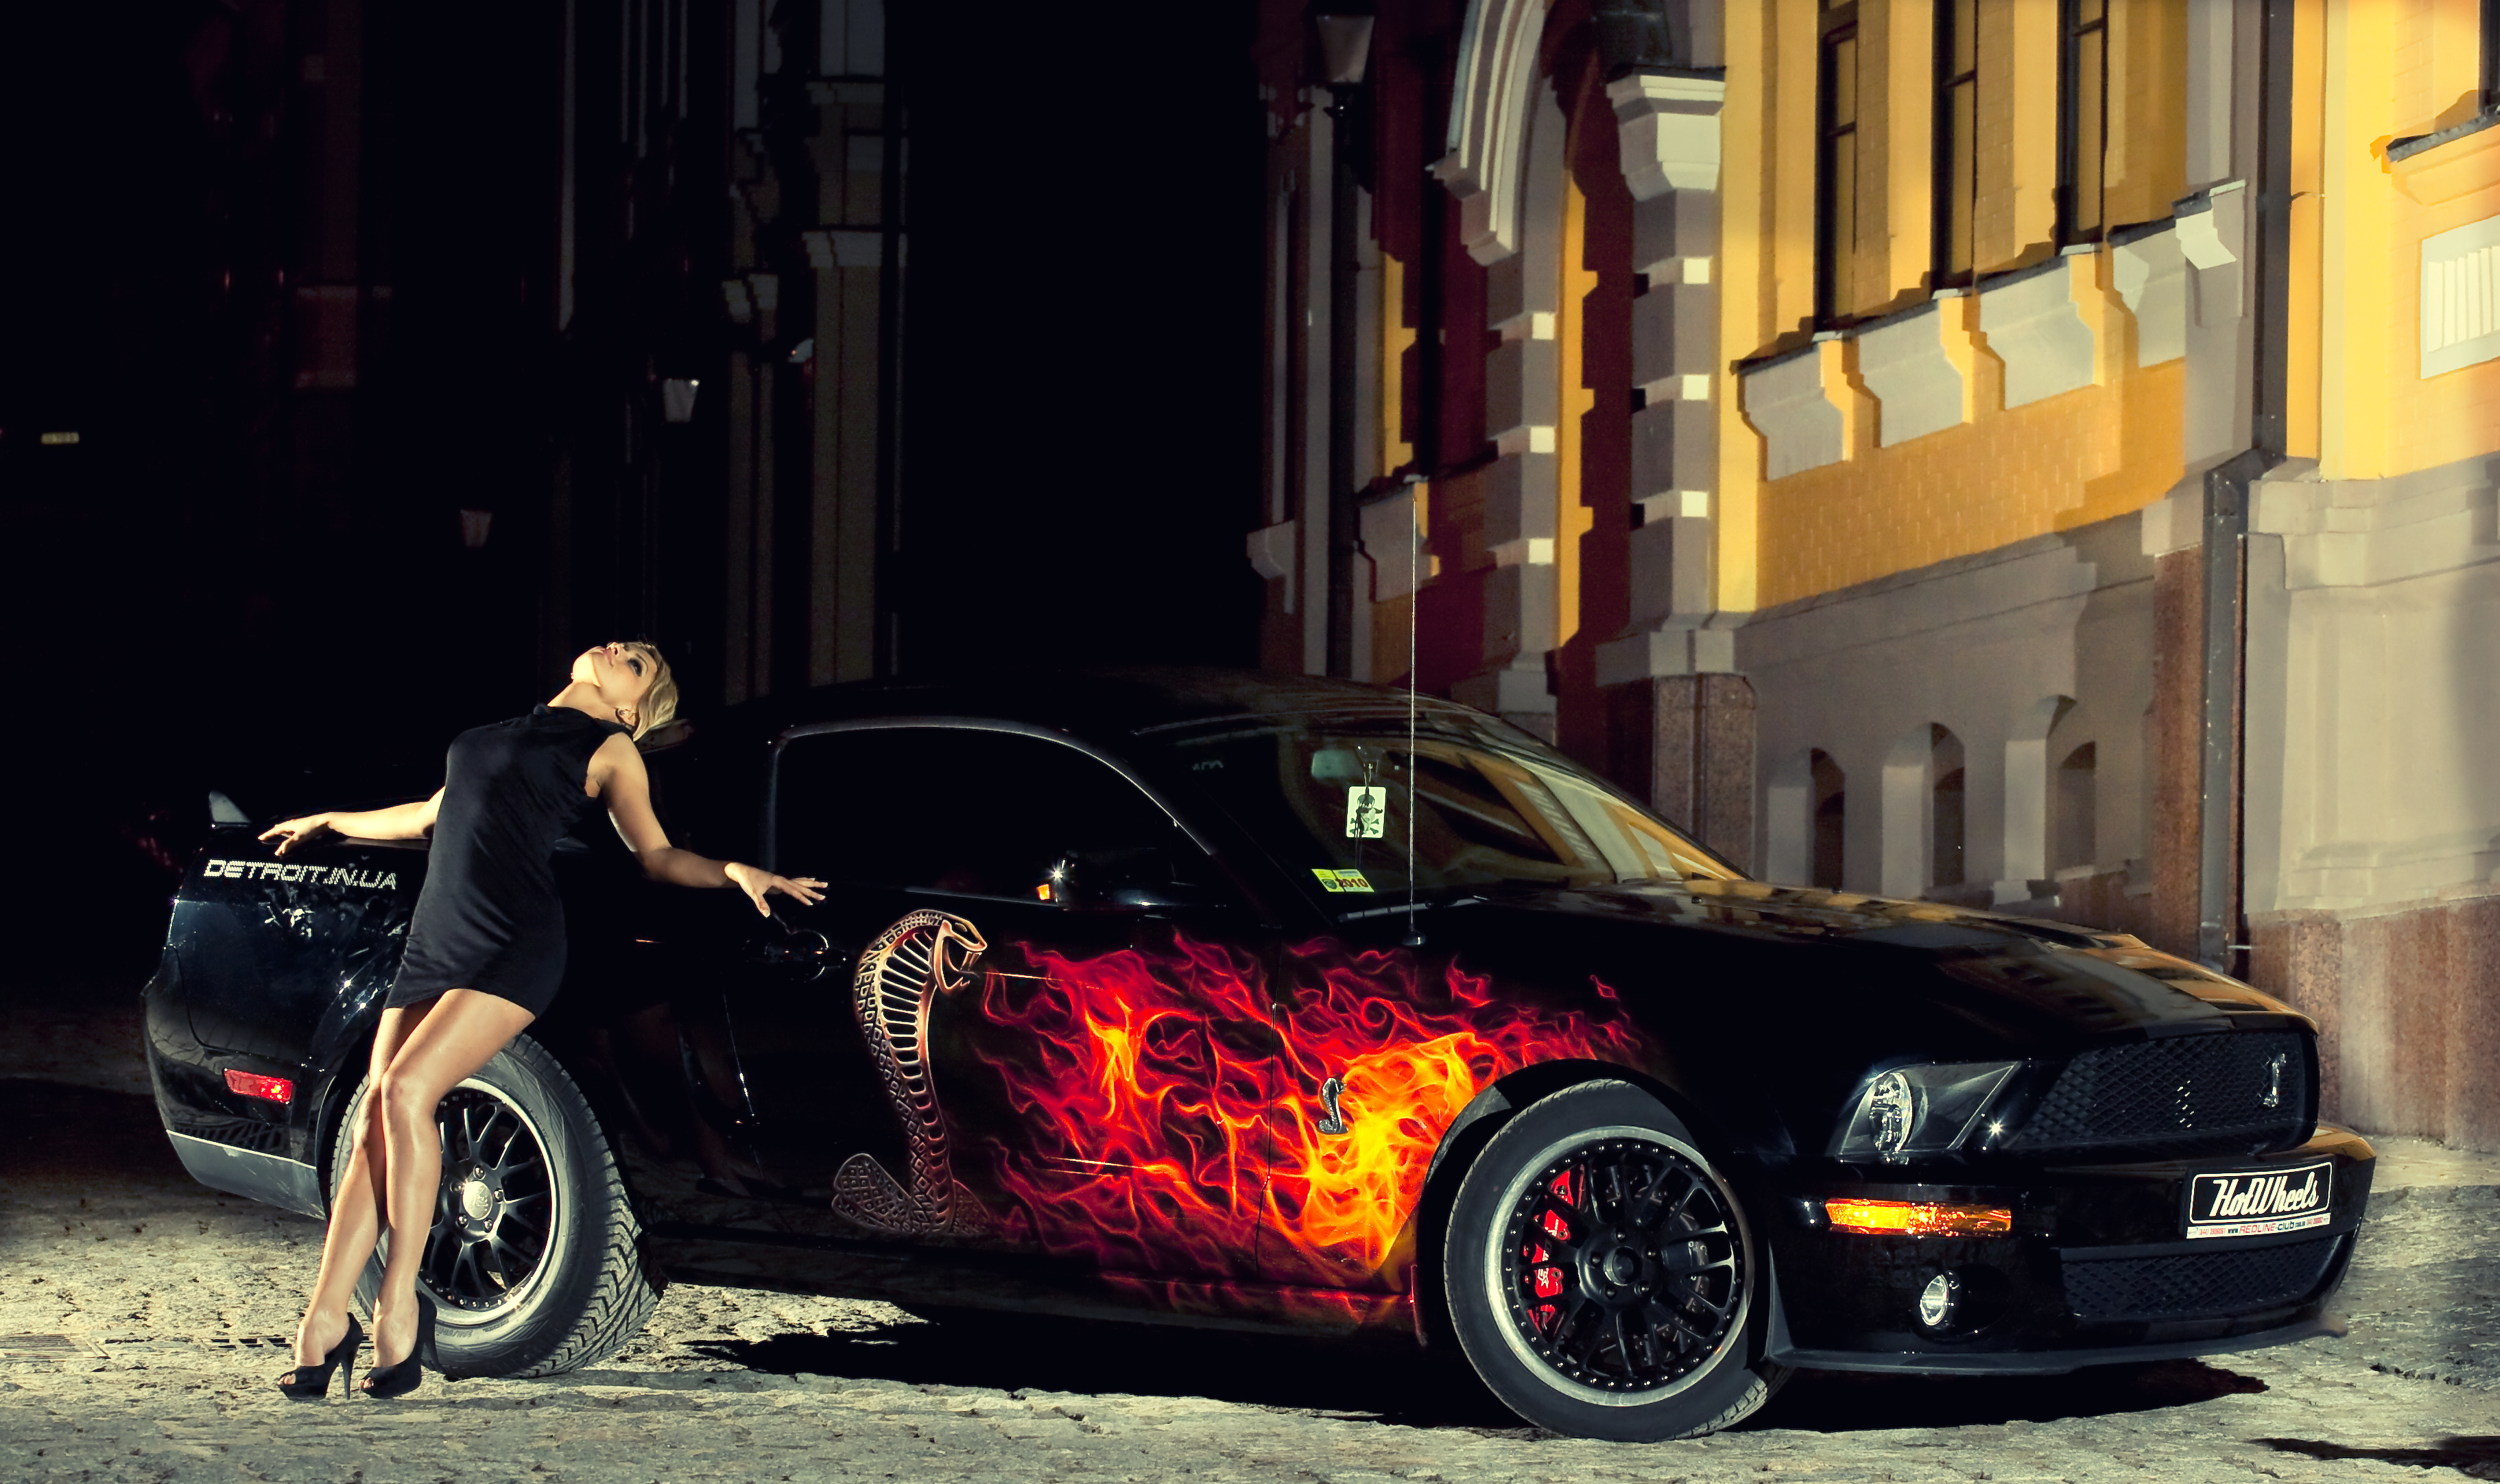 Customized Ford Mustang with flames and serpent.